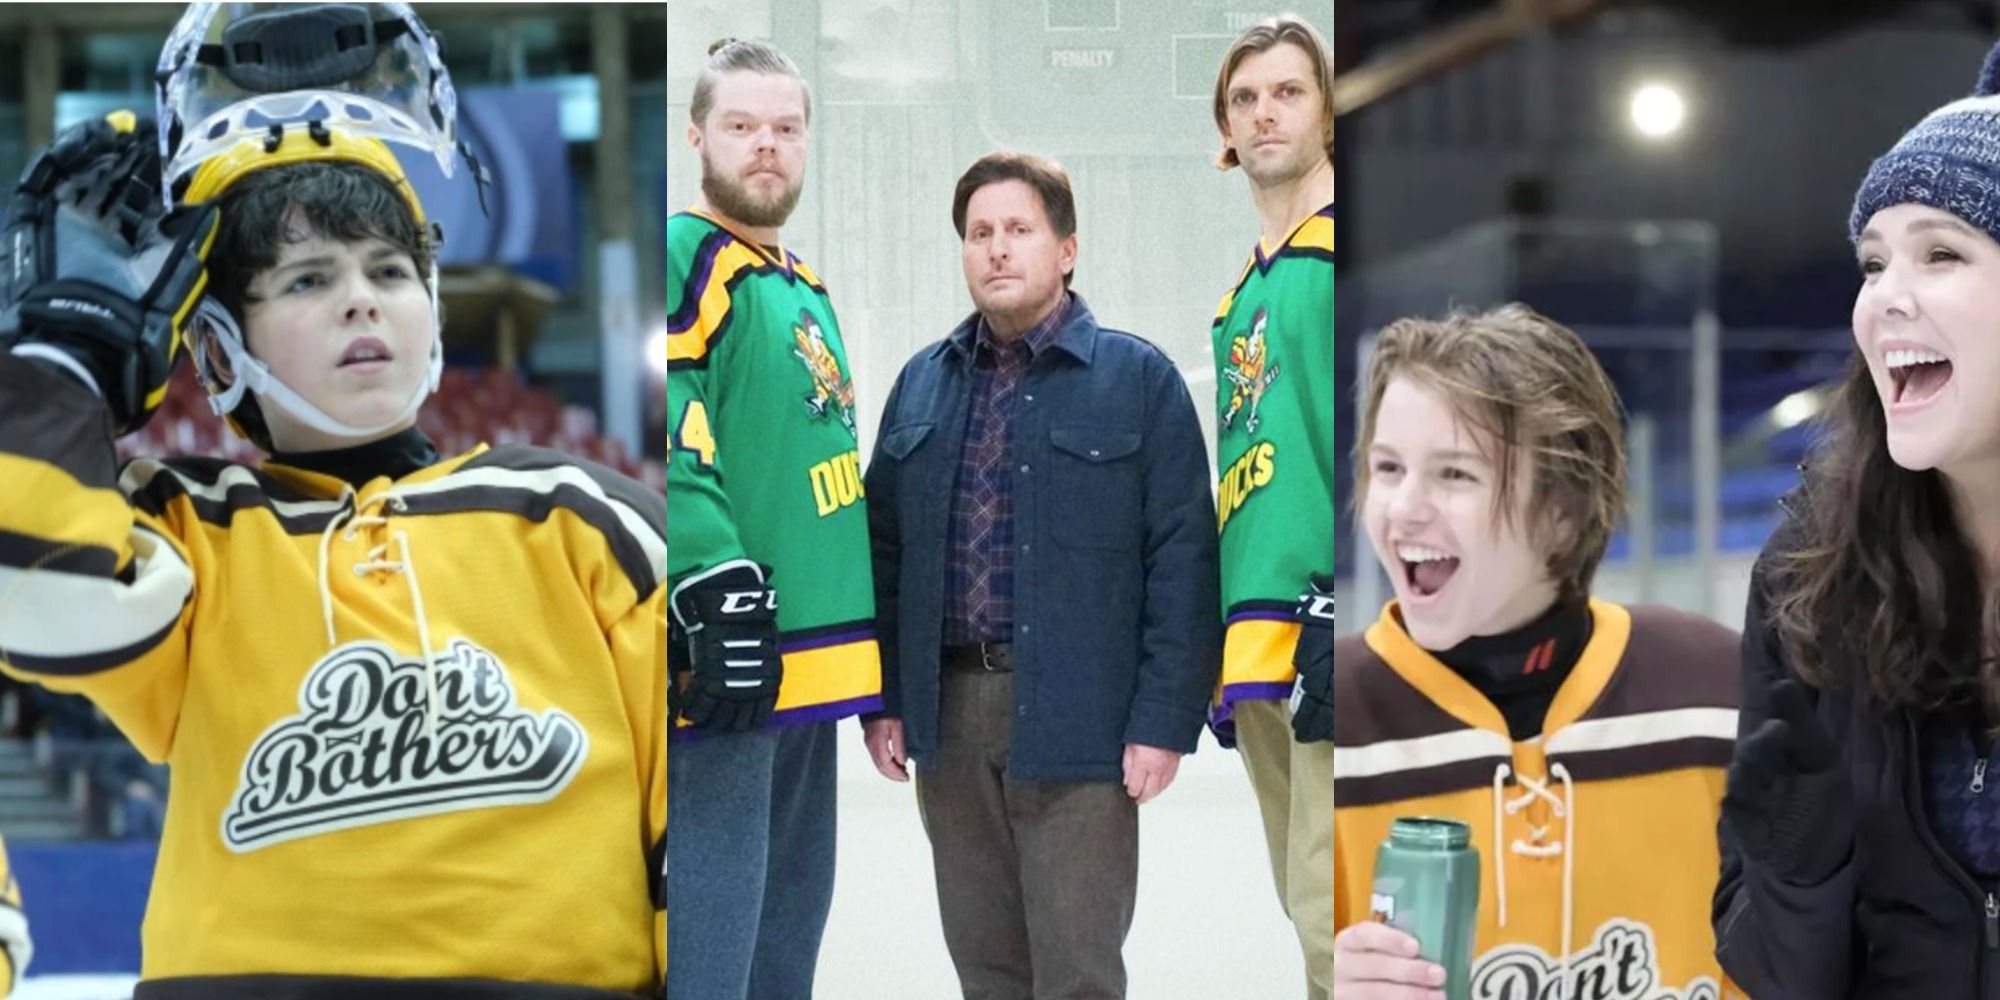 Collage of images from Mighty Ducks Game Changers